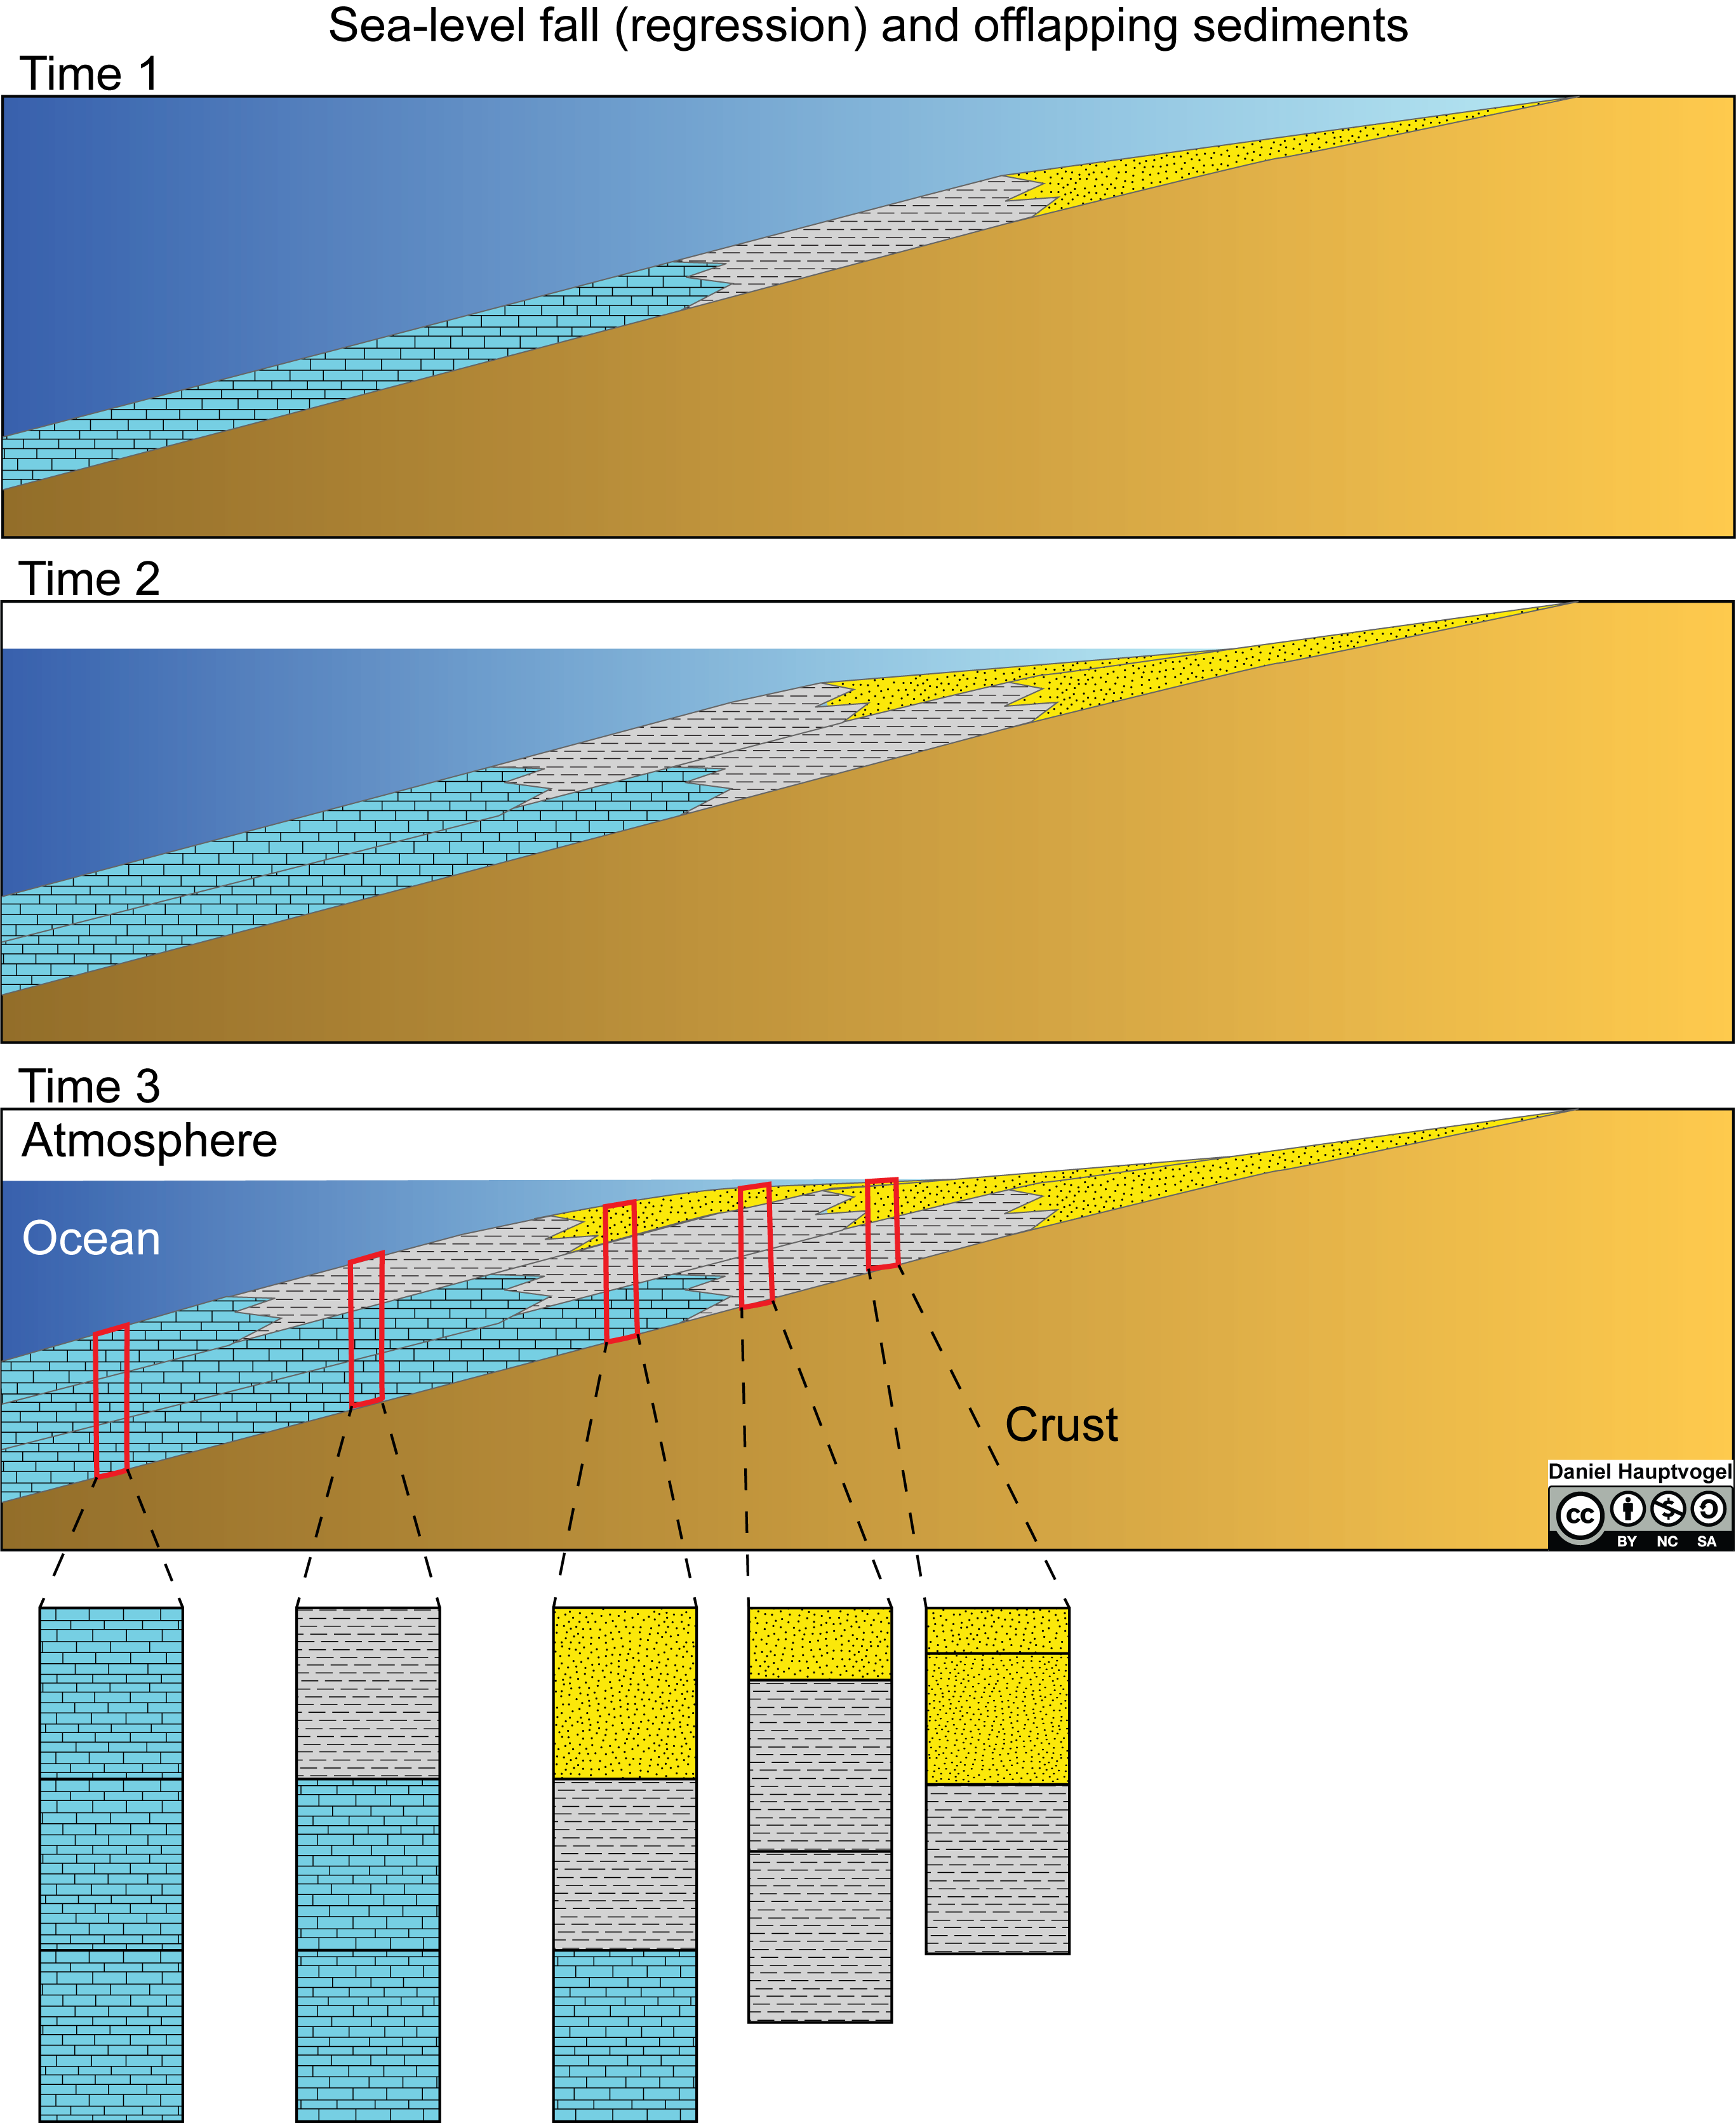 Three periods of regression of sea-level fall at the edge of the continent. Below are several stratigraphic columns.